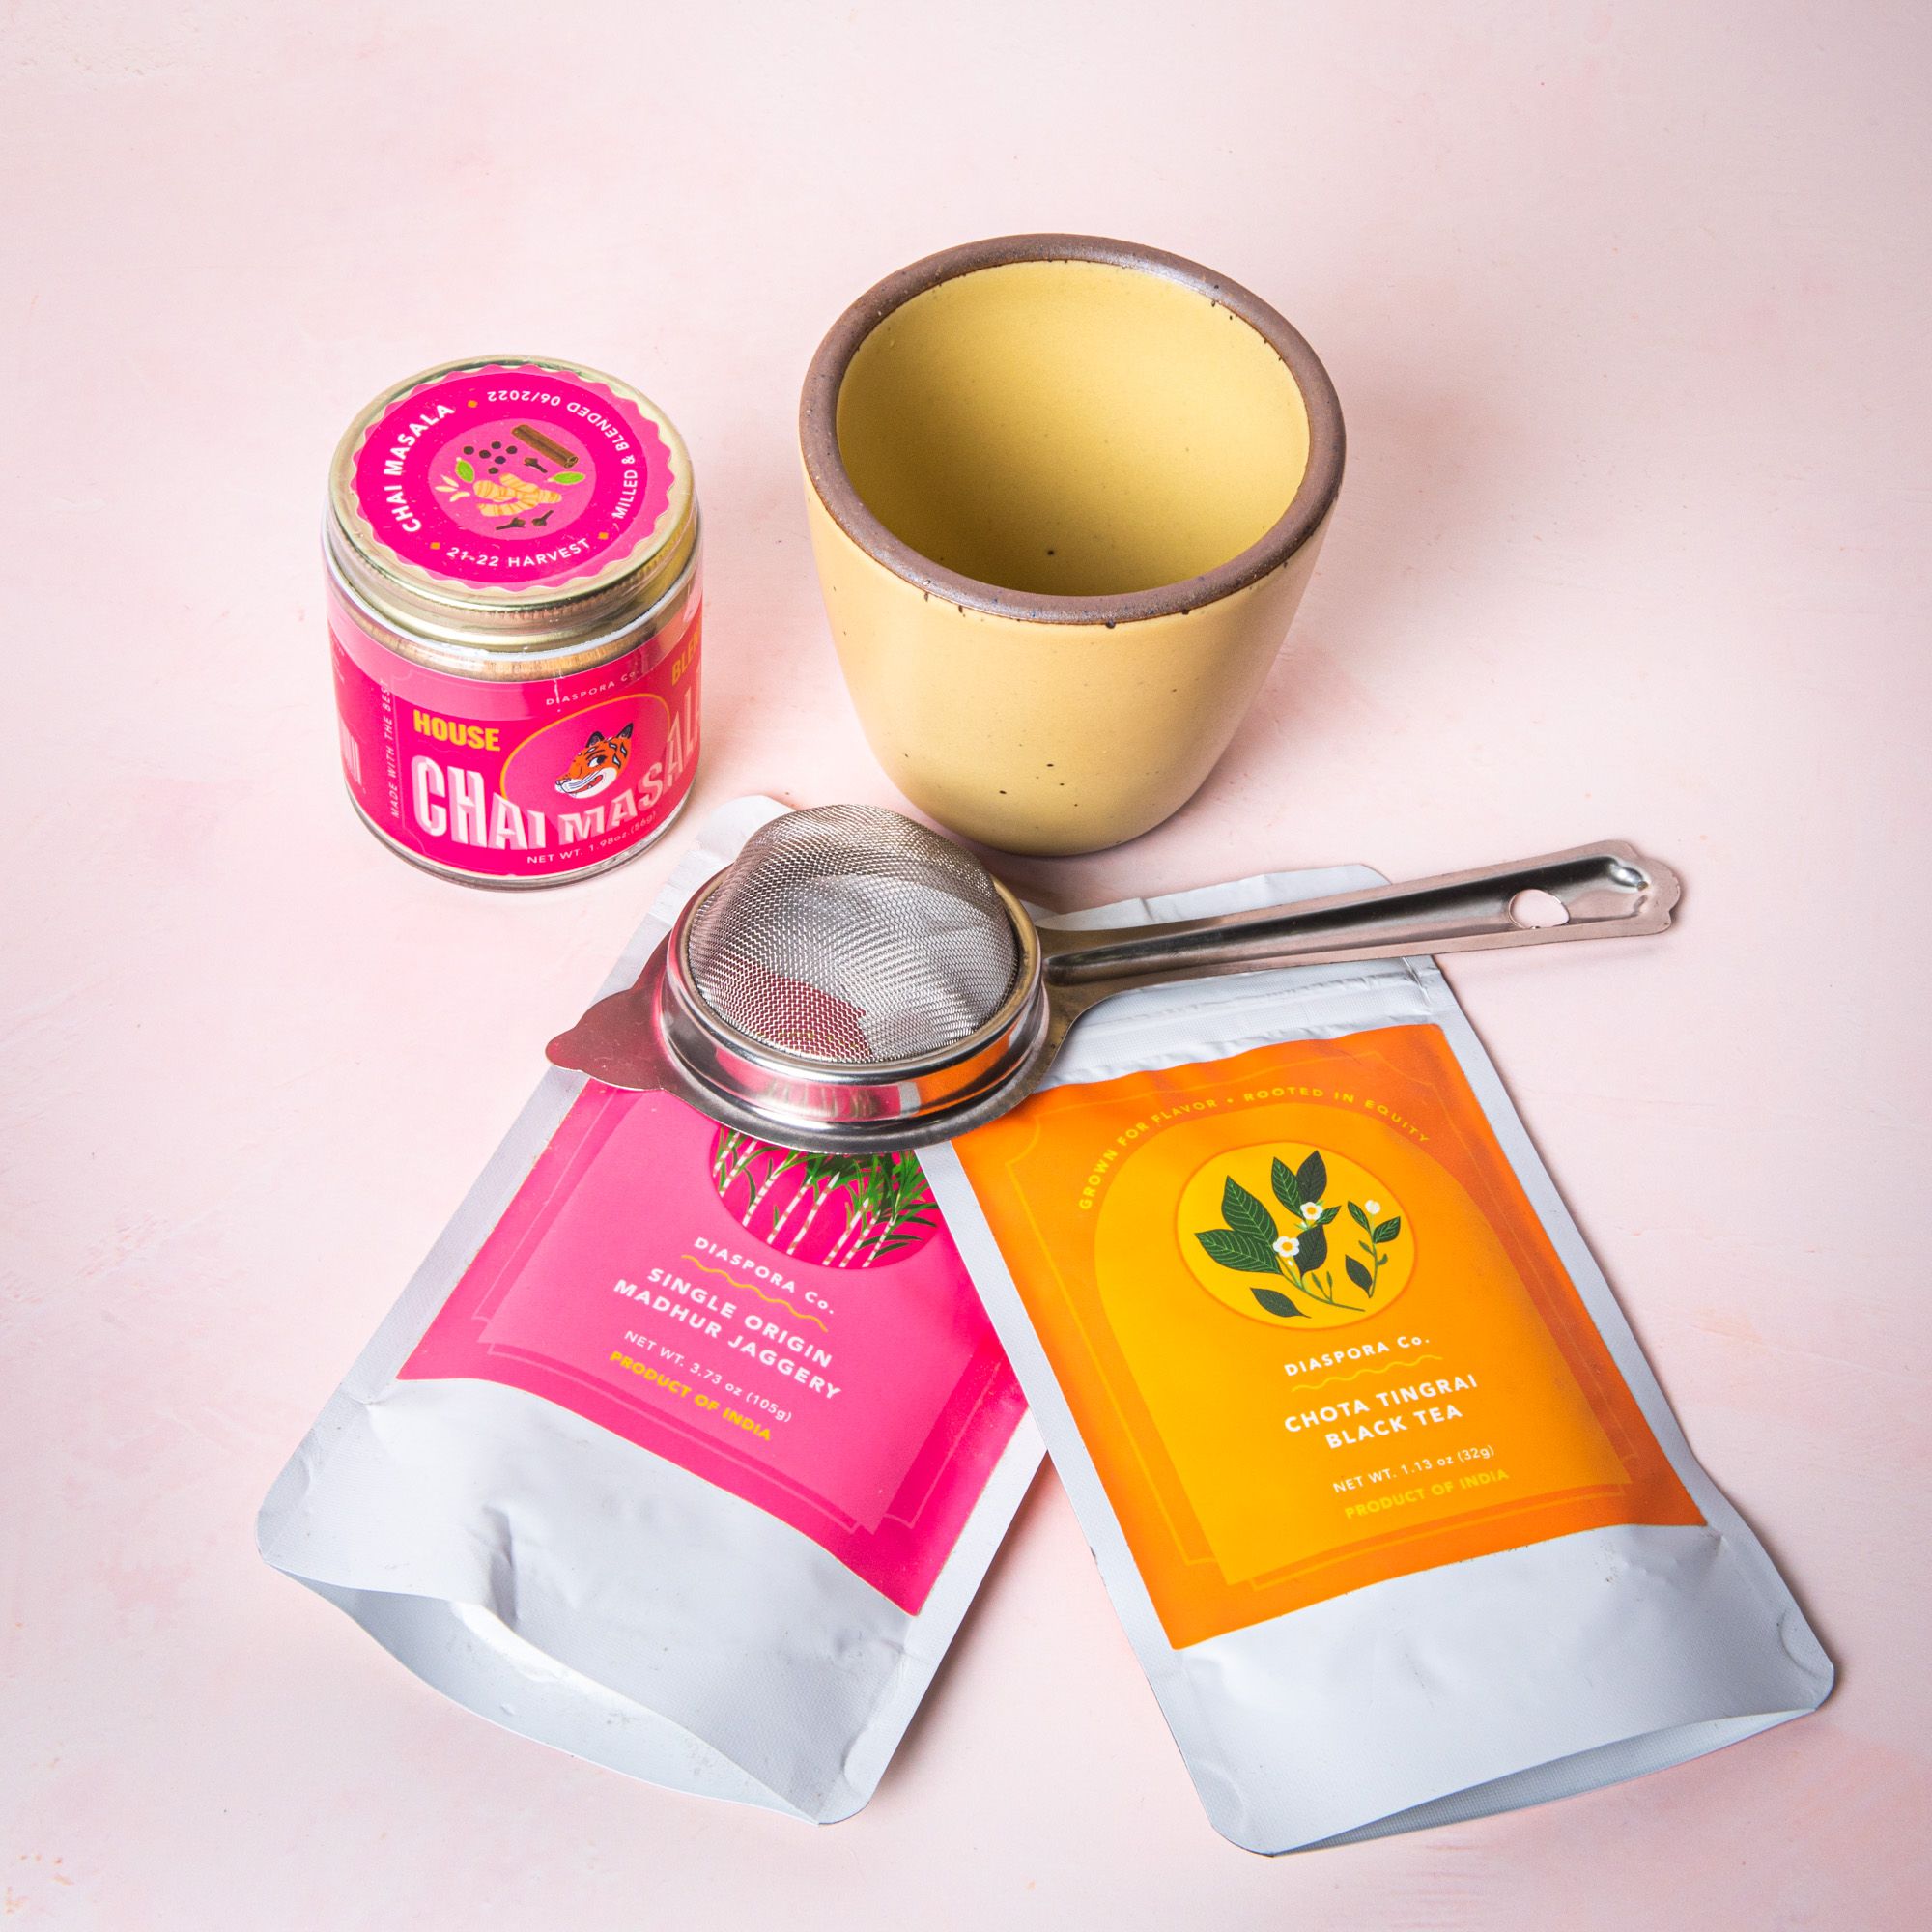 A chai bundle on a soft pink background featuring a soft butter yellow kulhad, a tea strainer, a pink jar of chai masala, and 2 packages of jaggery and black tea